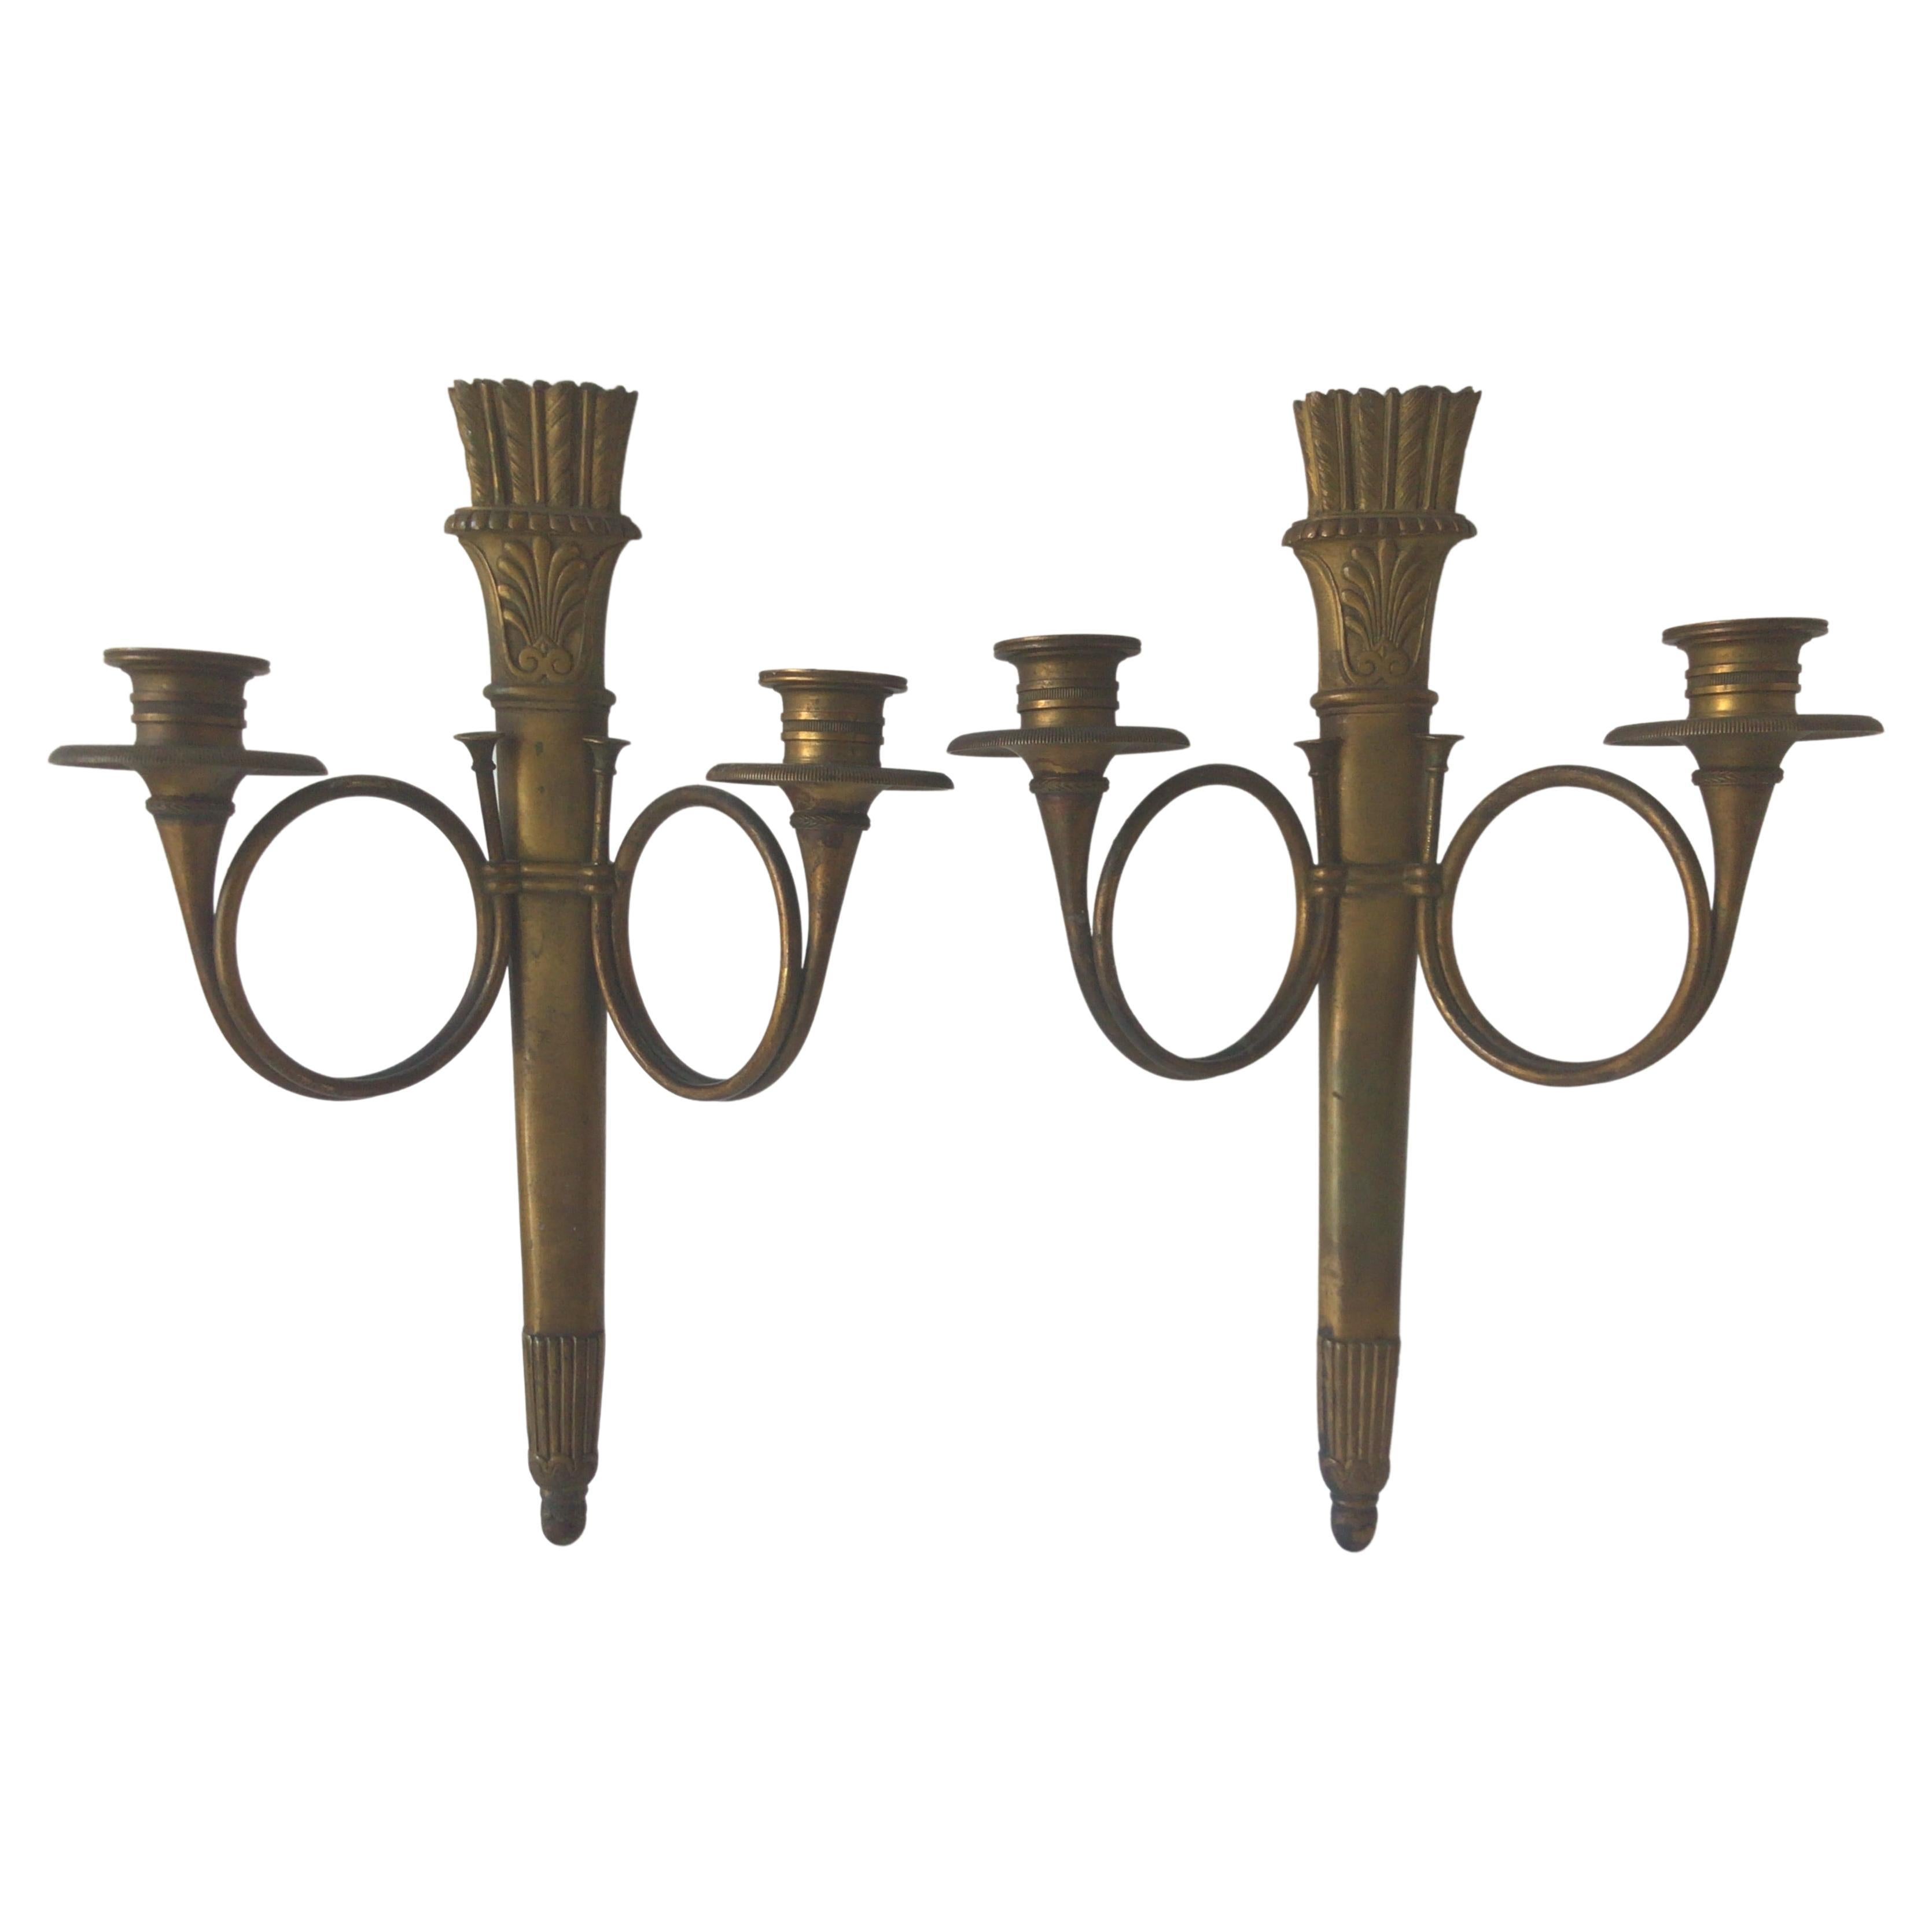 1890s, French Empire Bronze Sconces For Sale